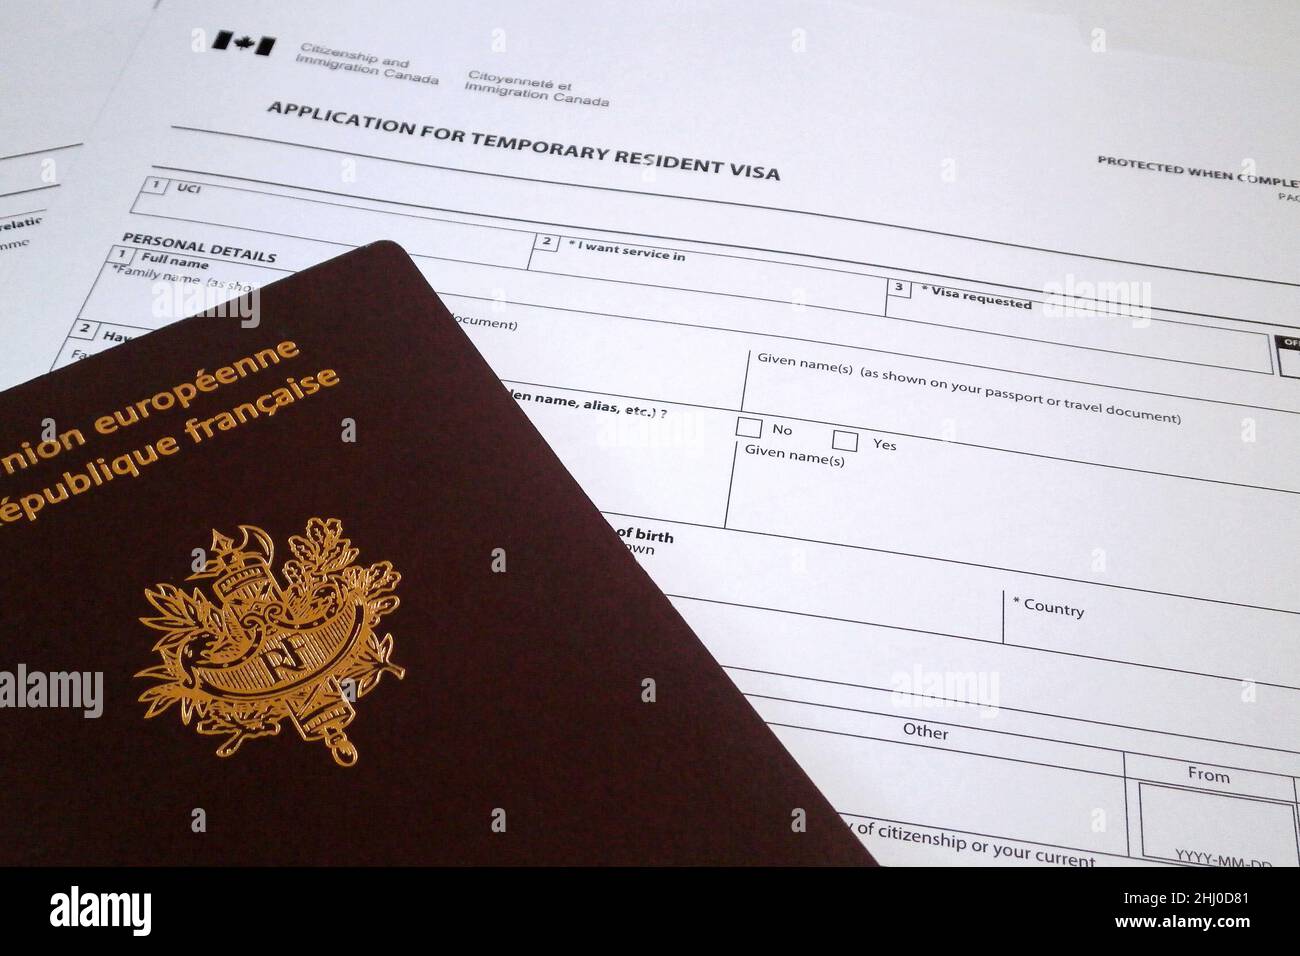 A French passport on the top of an Canadian application form to obtain a Temporary resident visa. Stock Photo